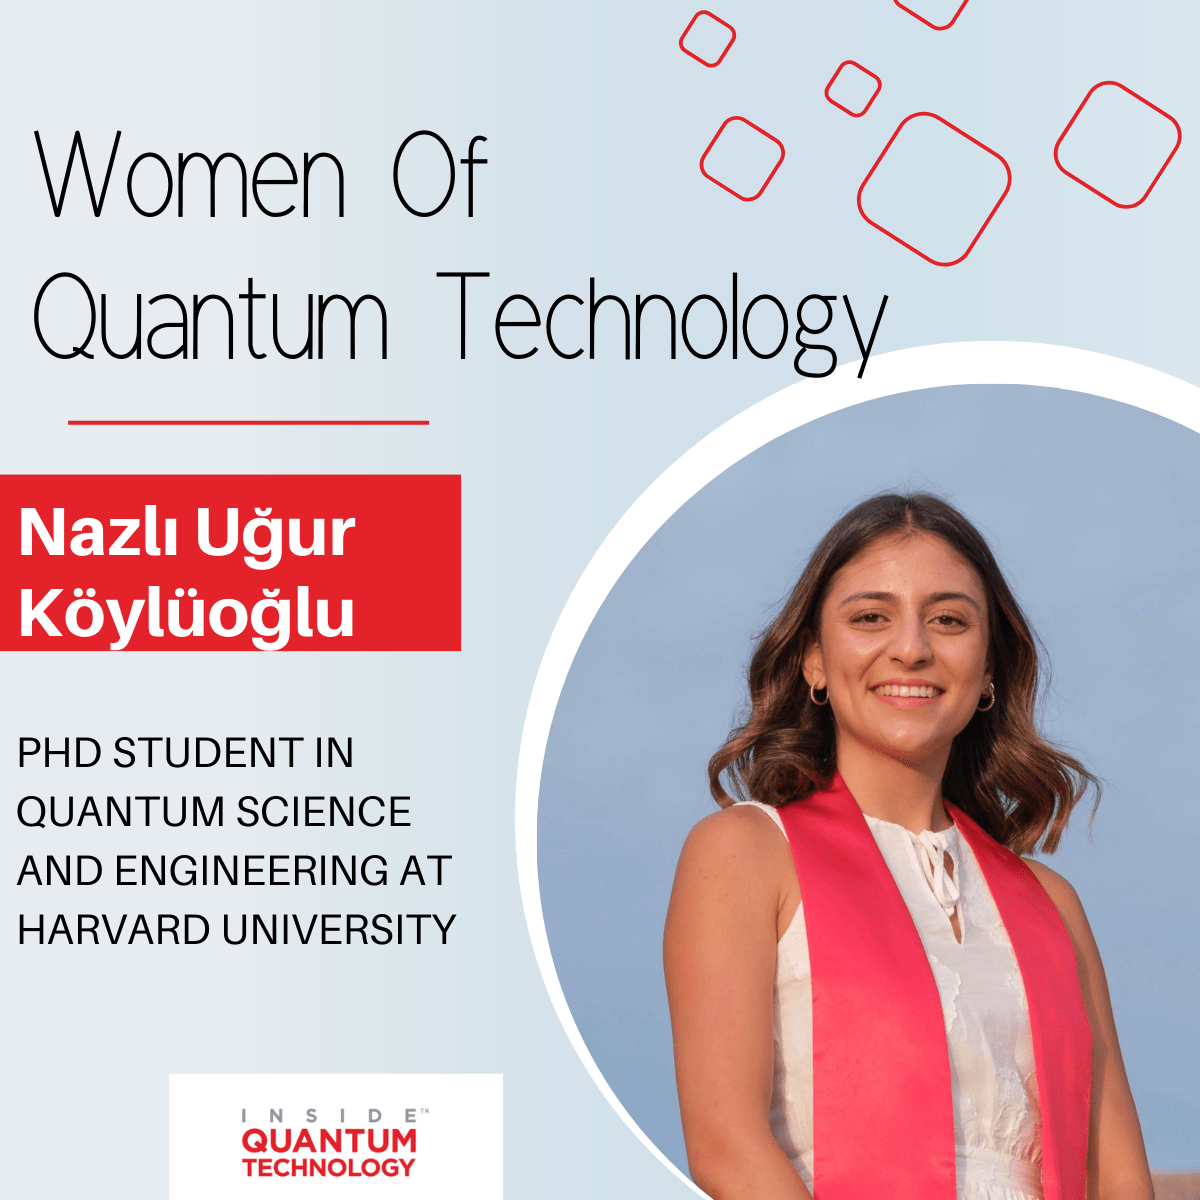 Nazlı Uğur Köylüoğlu, a student at Harvard University, shares her story of creating some of the biggest quantum organizations for students in the country.